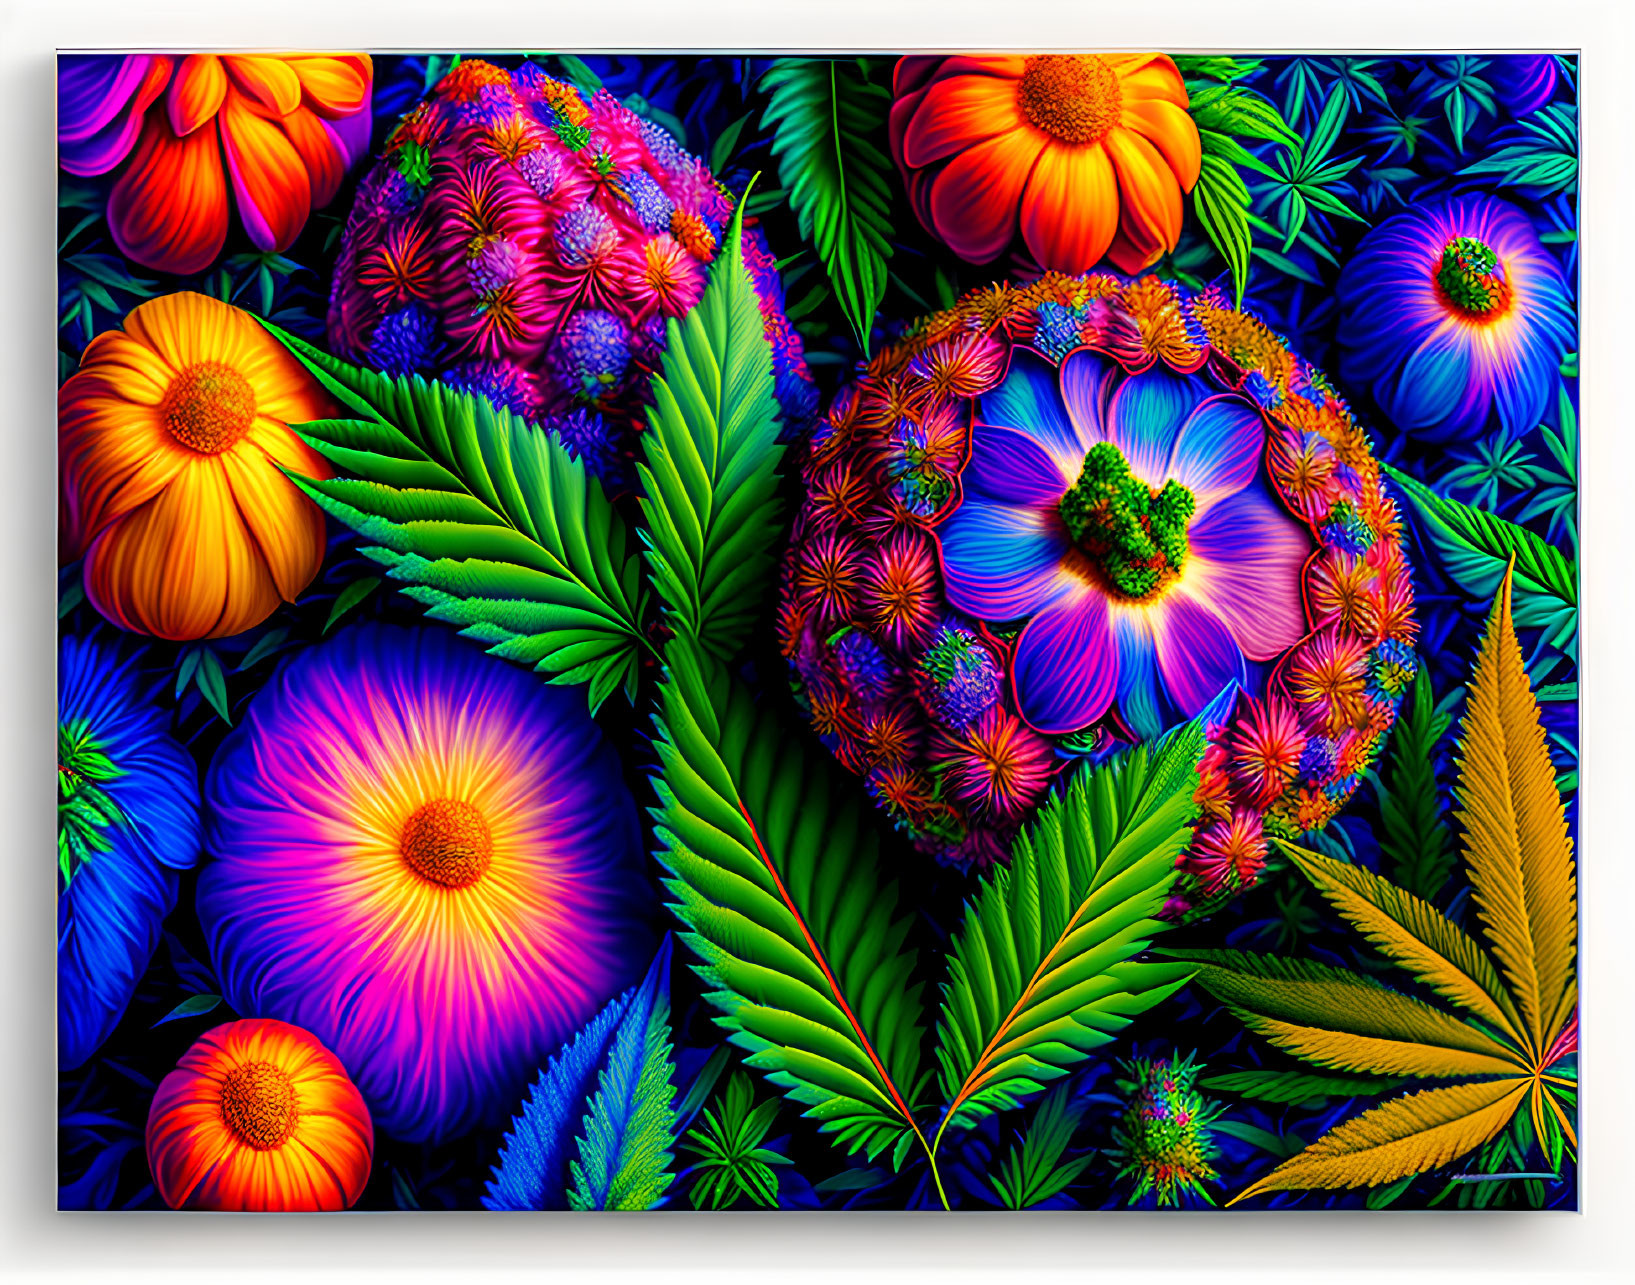 Neon-colored stylized flowers and foliage on dark background